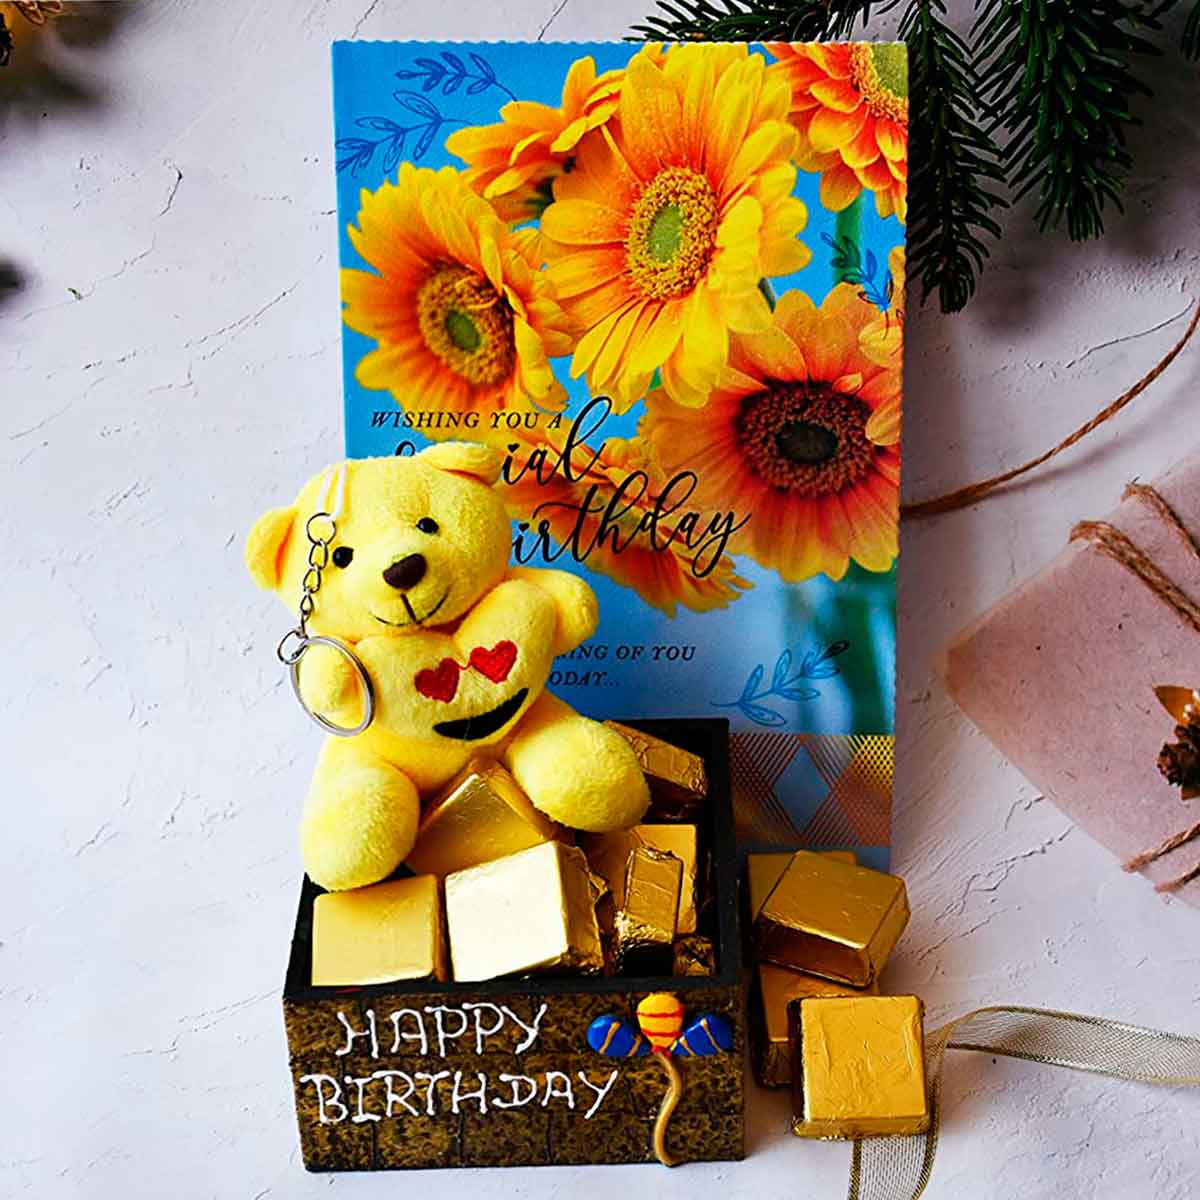 Thank You Messages For Birthday Gift - WishesMsg